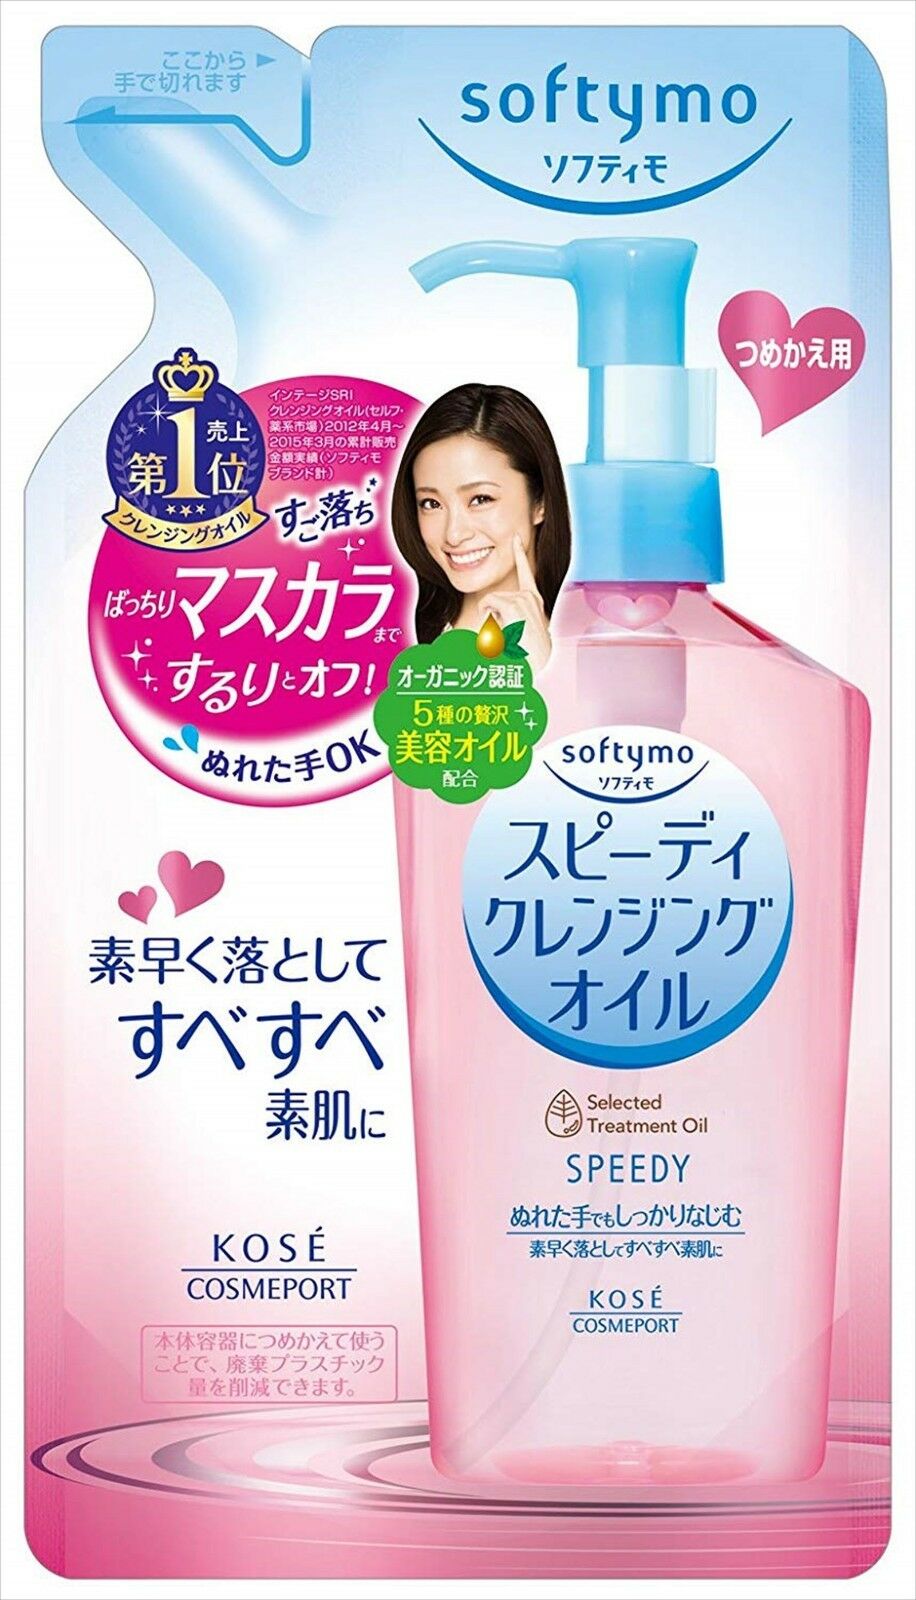 Kose Softymo Speedy Cleansing Oil Refill 200 Ml Makeup Remover